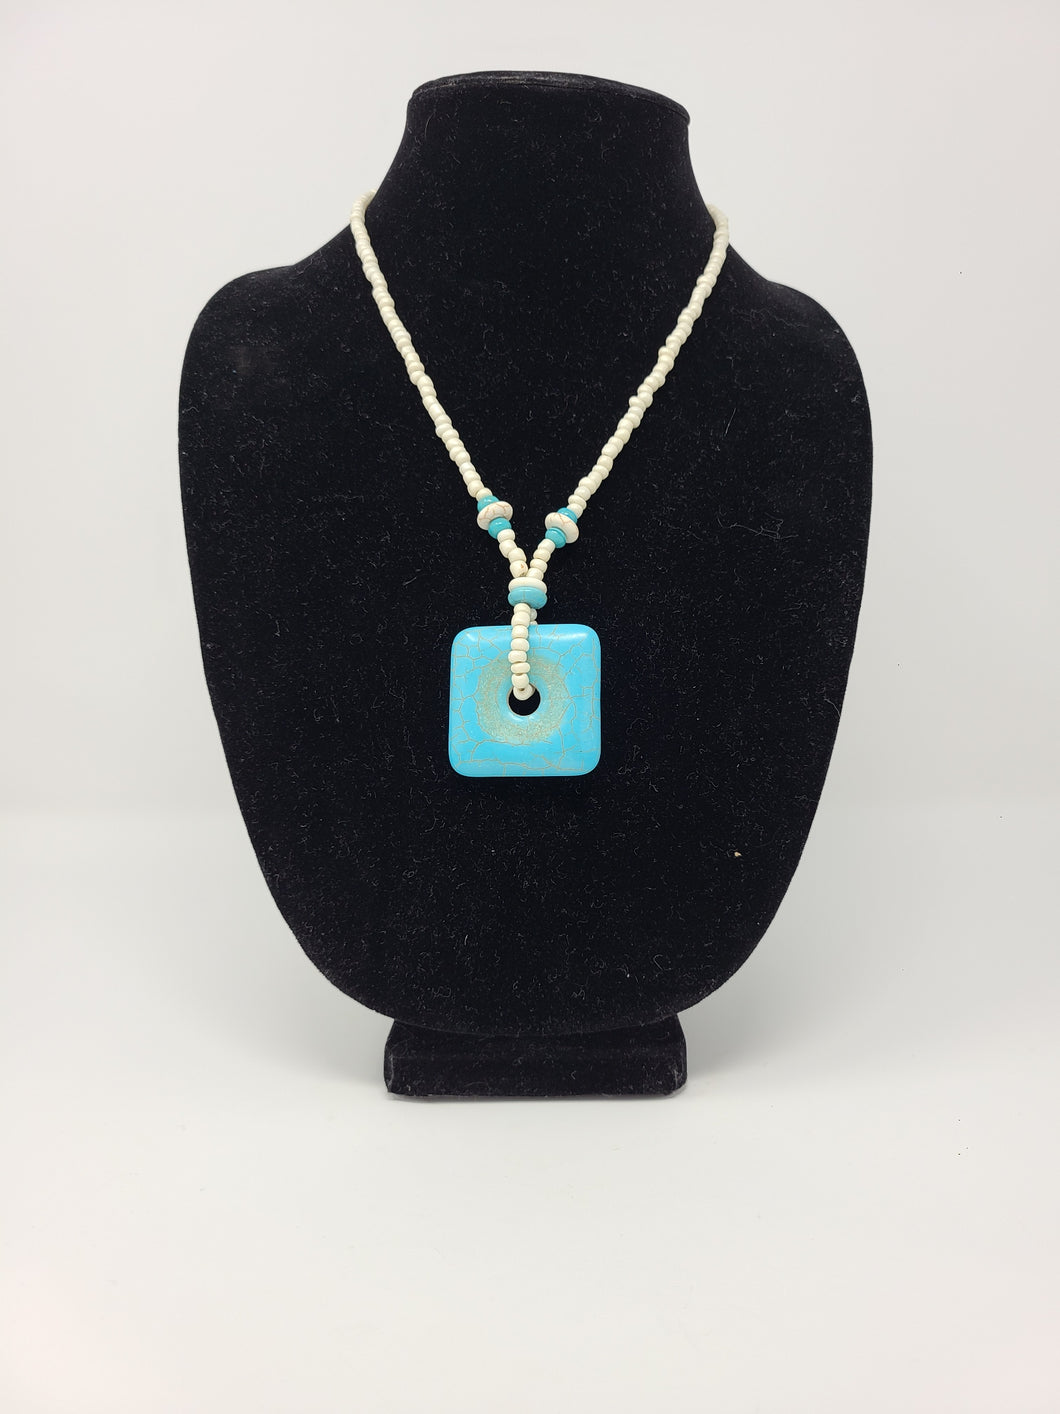 Necklace with Square Turquoise Bead